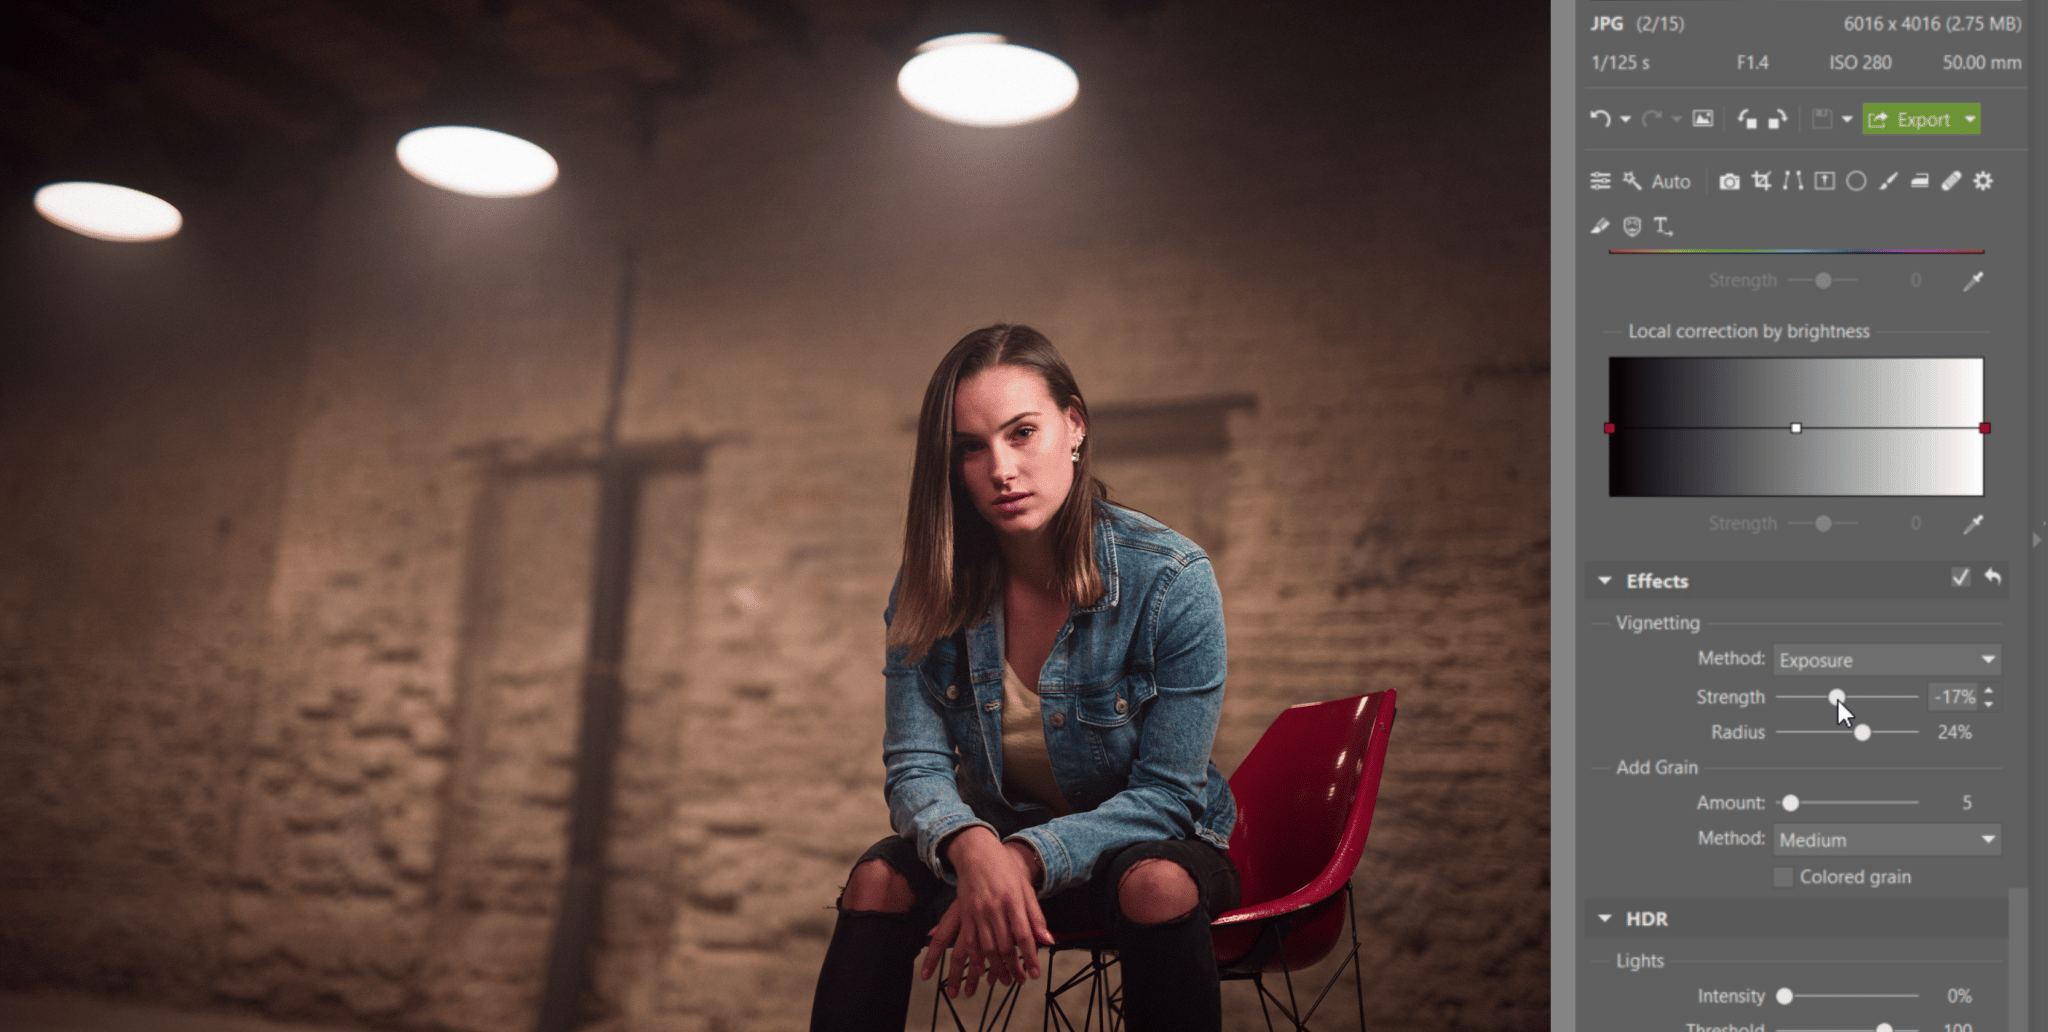 Try Editing a Nighttime Portrait - vignetting